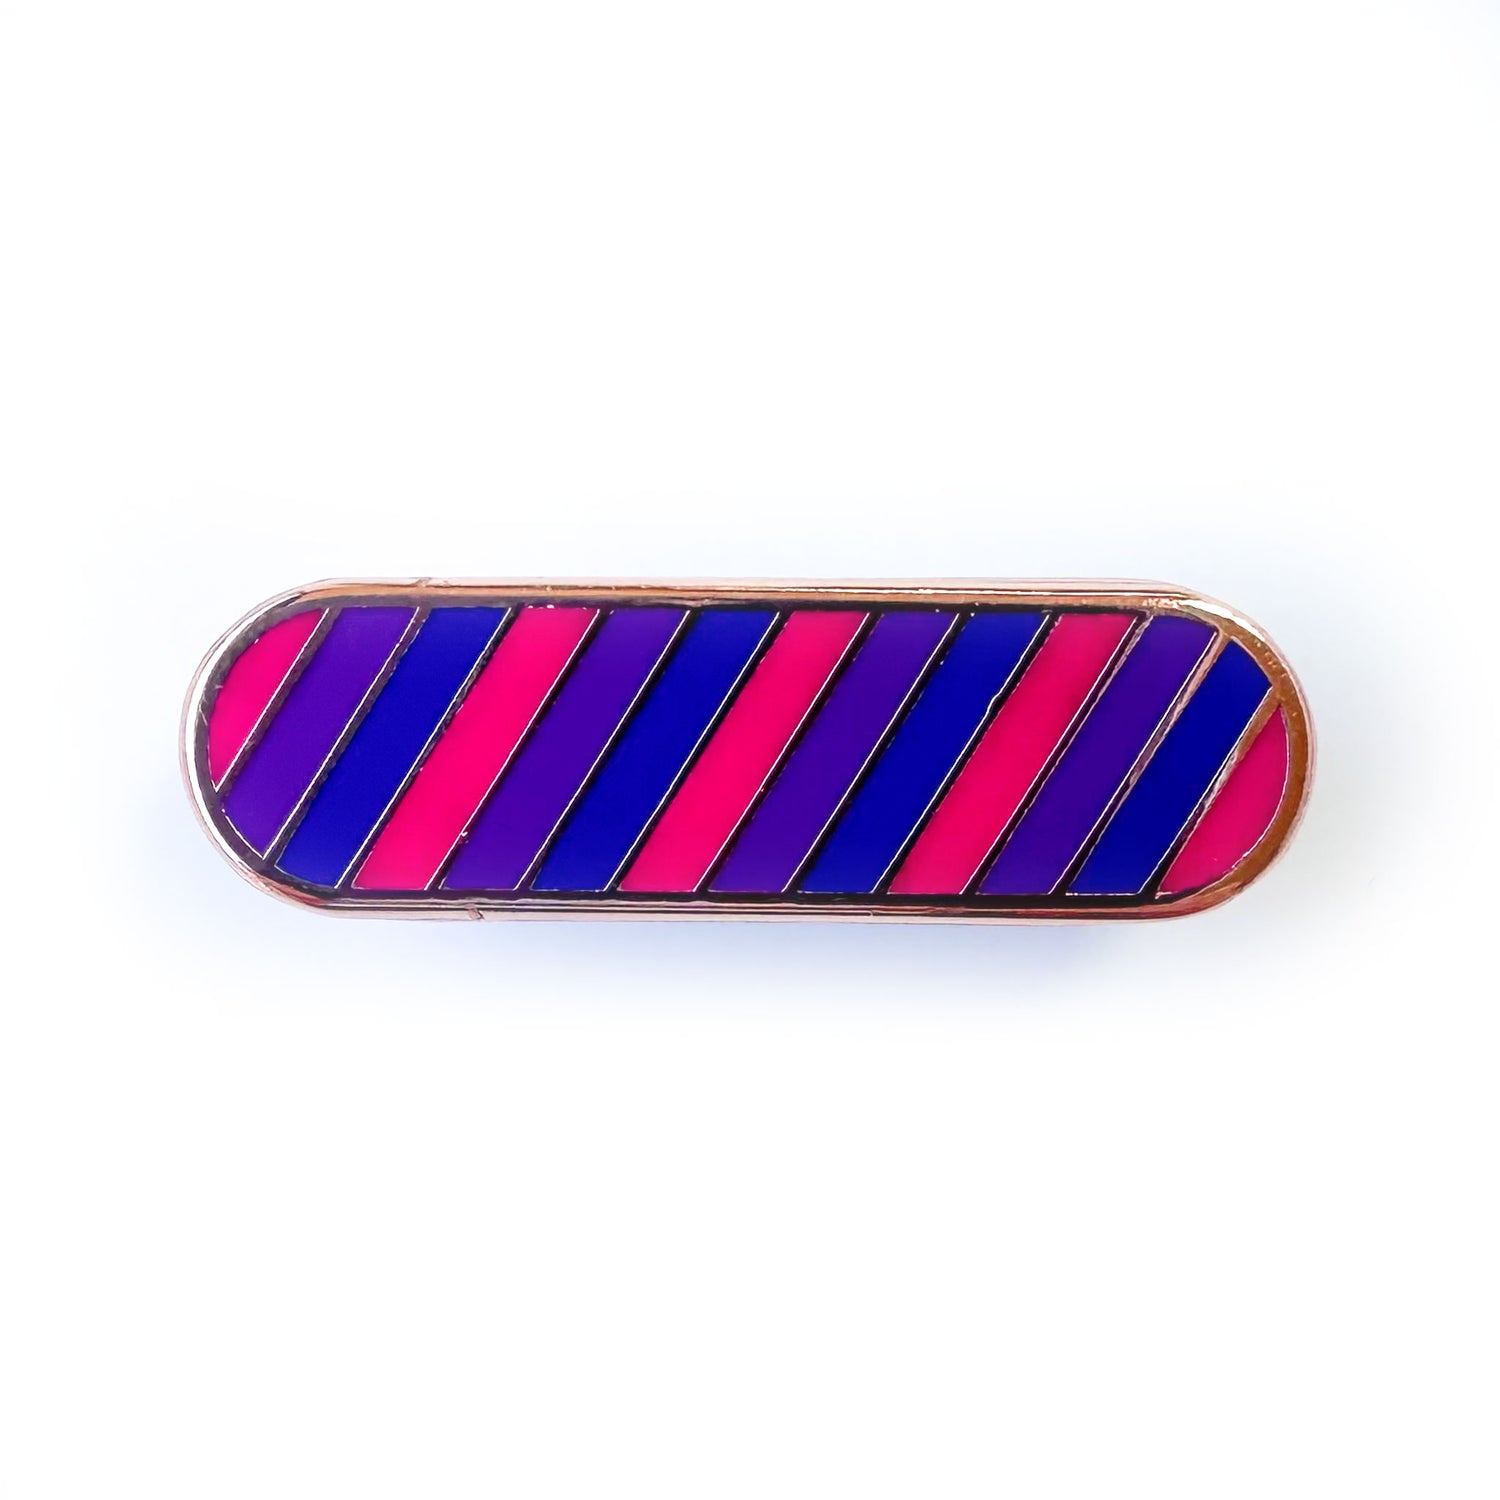 A bandaid shaped enamel pin with diagonal stripes in pink, purple, and blue which are the colors of the Bi Pride Flag. 